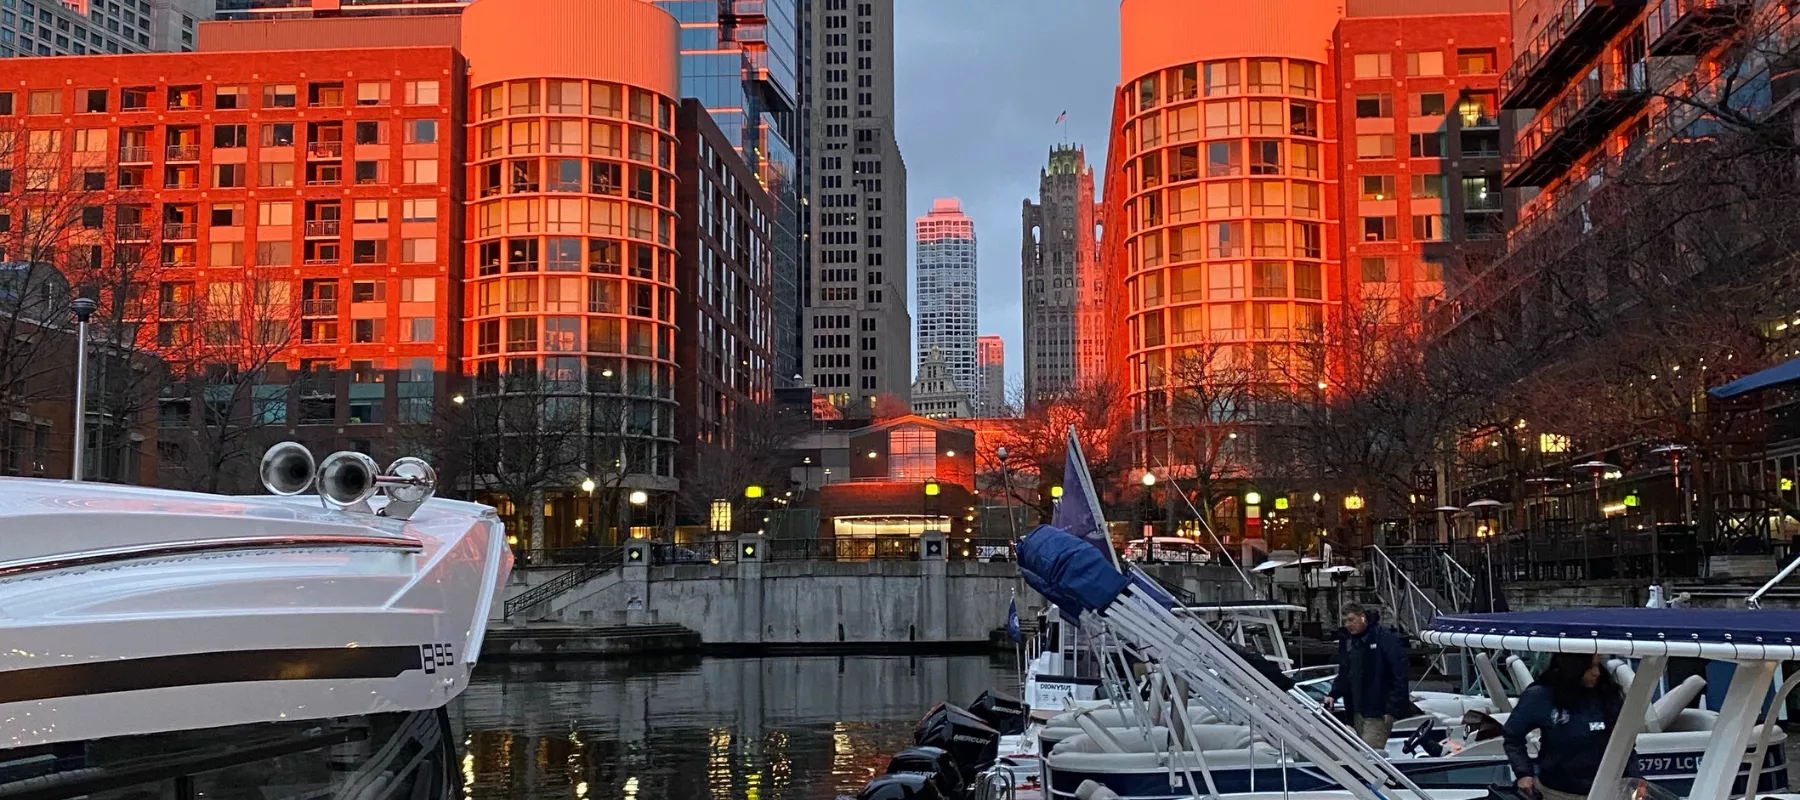 DOWNTOWN CHICAGO FREEDOM BOAT CLUB STREETERVILLE MARINA 